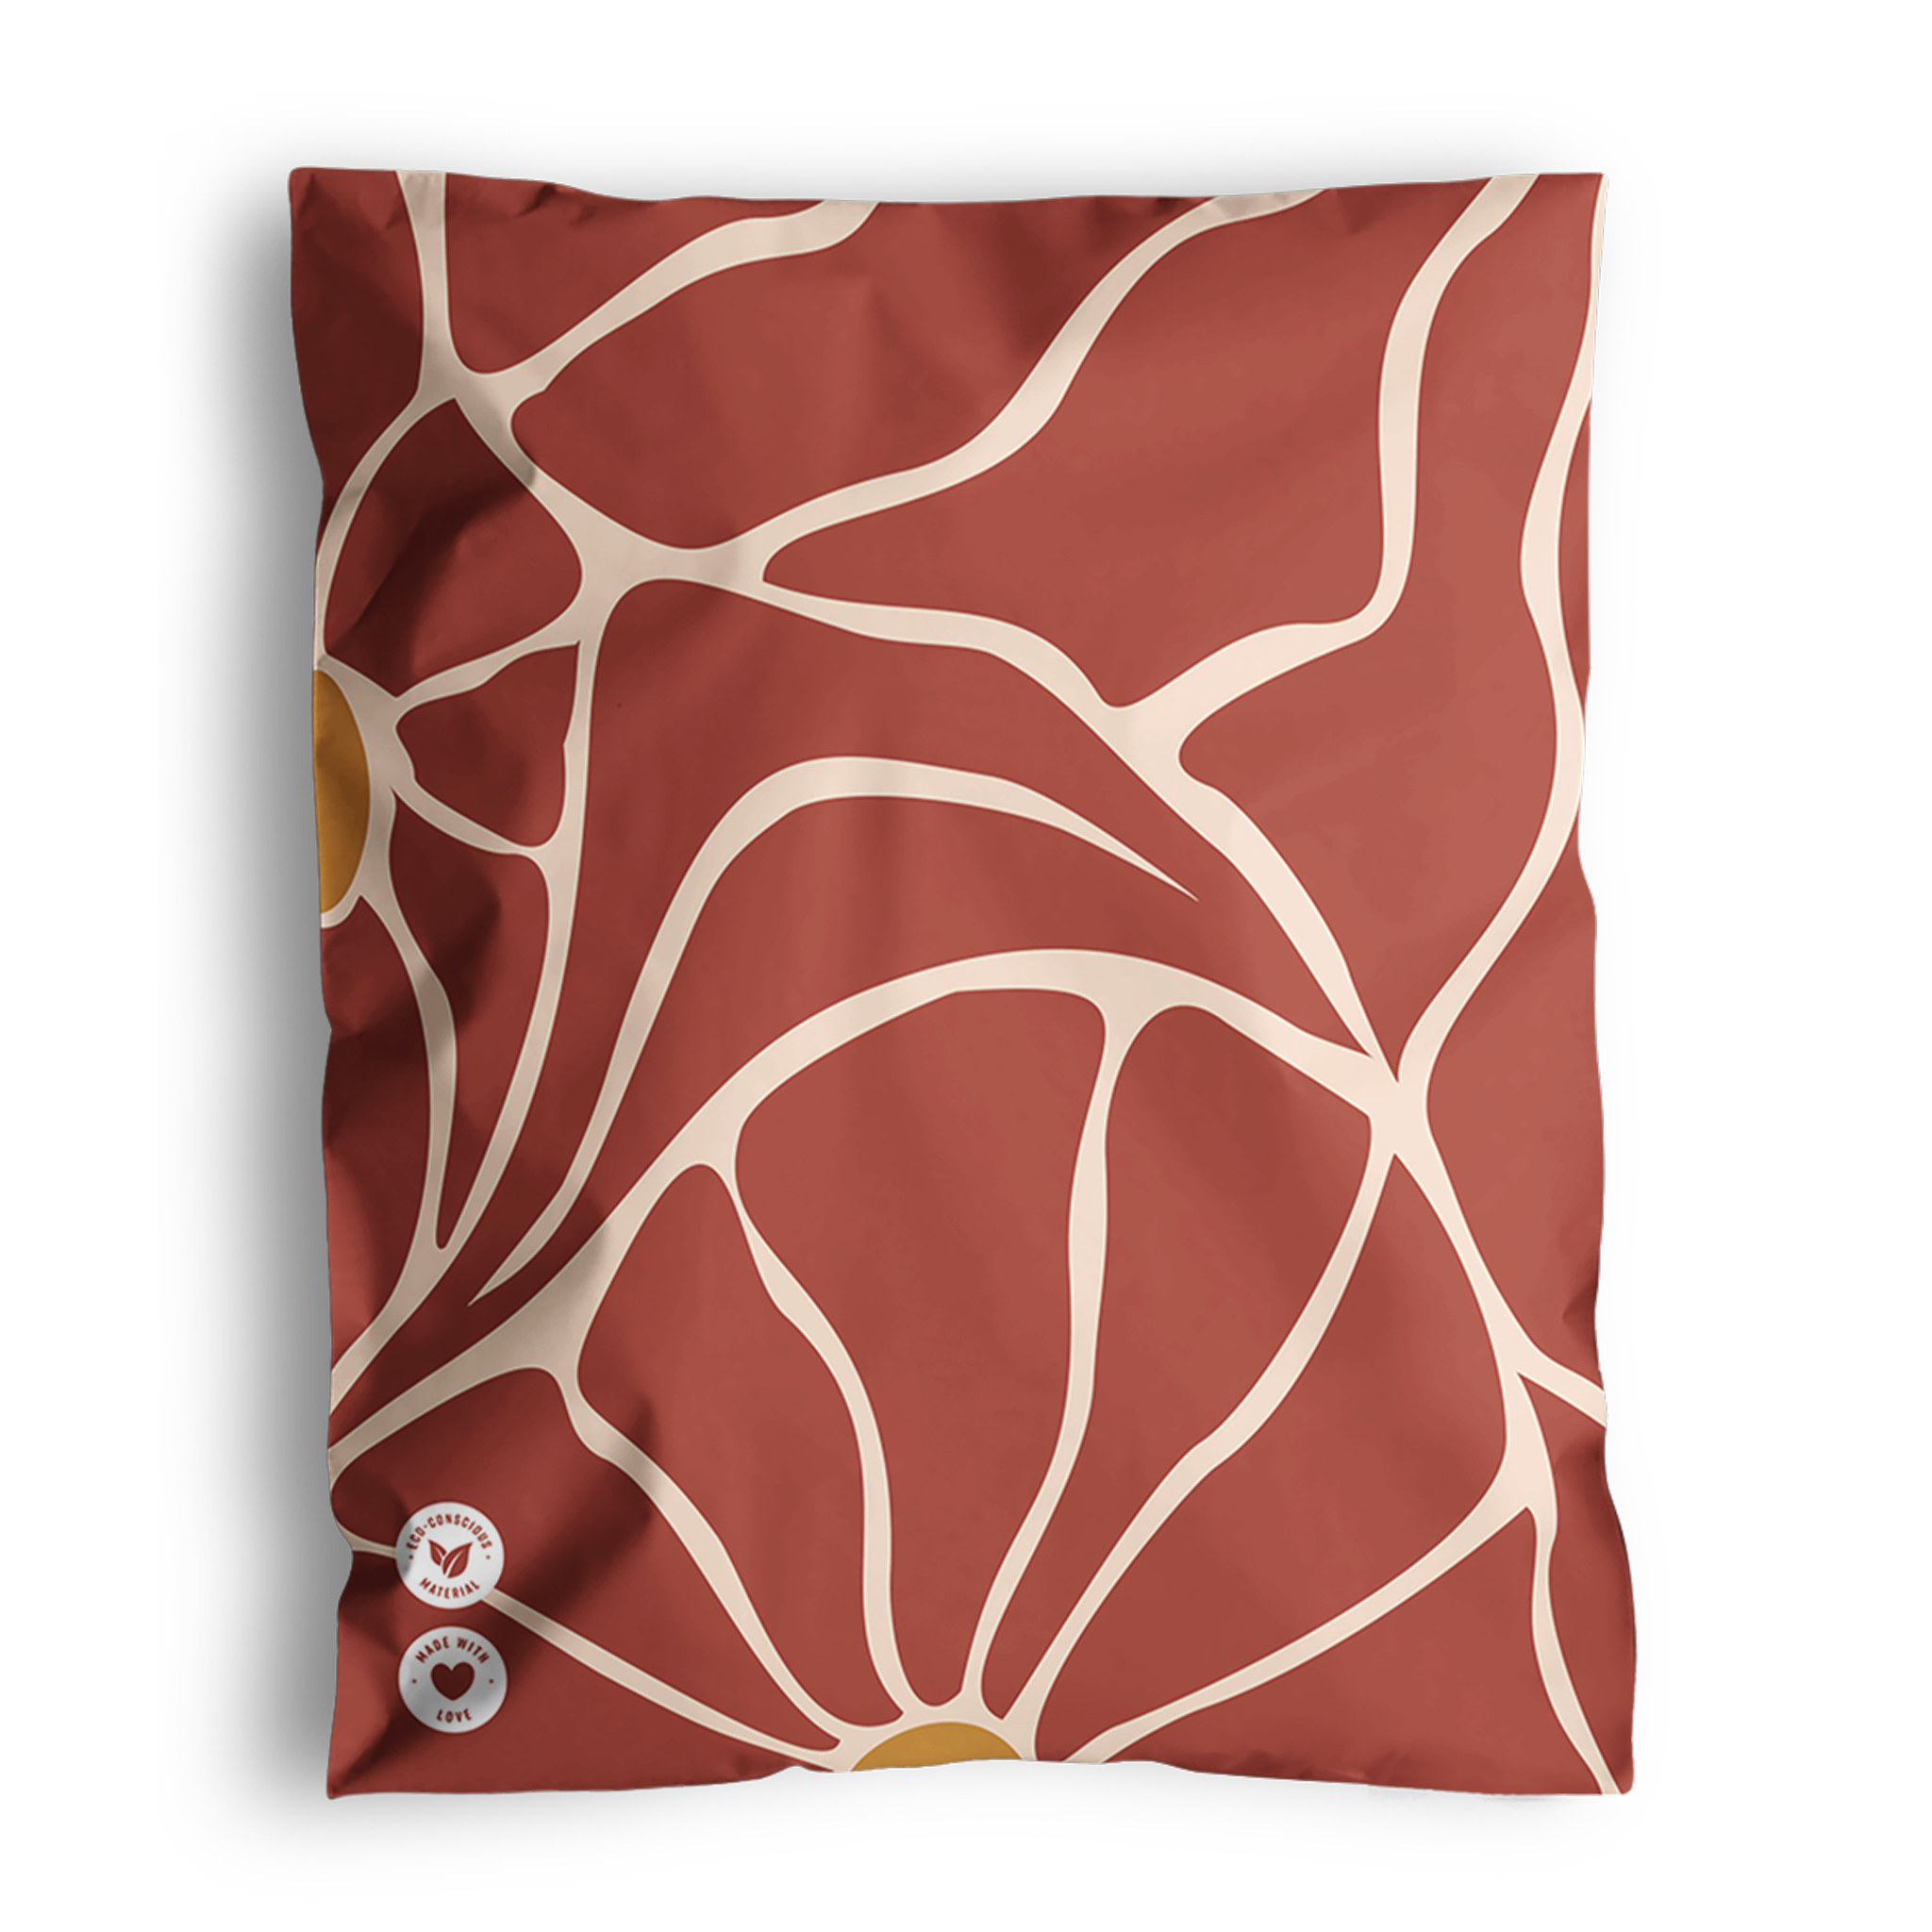 A red cloth with beige abstract floral patterns, featuring the Crimson Crove Mailers 10" x 13" by impack.co print and two small round patches with symbols in the lower left corner.